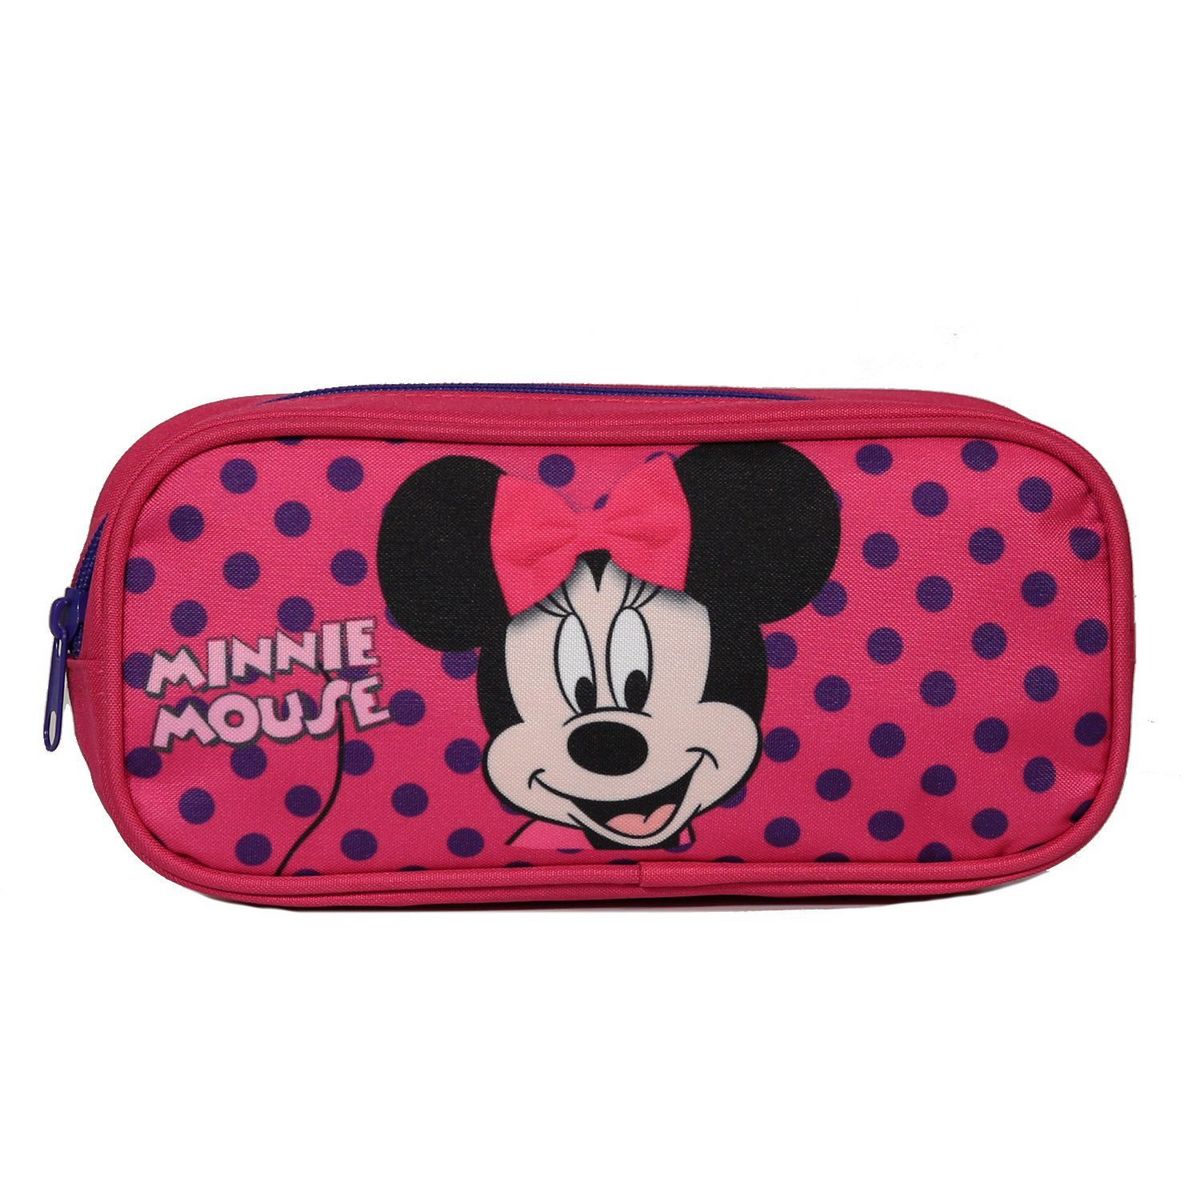 Bagtrotter Trousse scolaire rectangulaire Disney Minnie Rose Bagtrotter